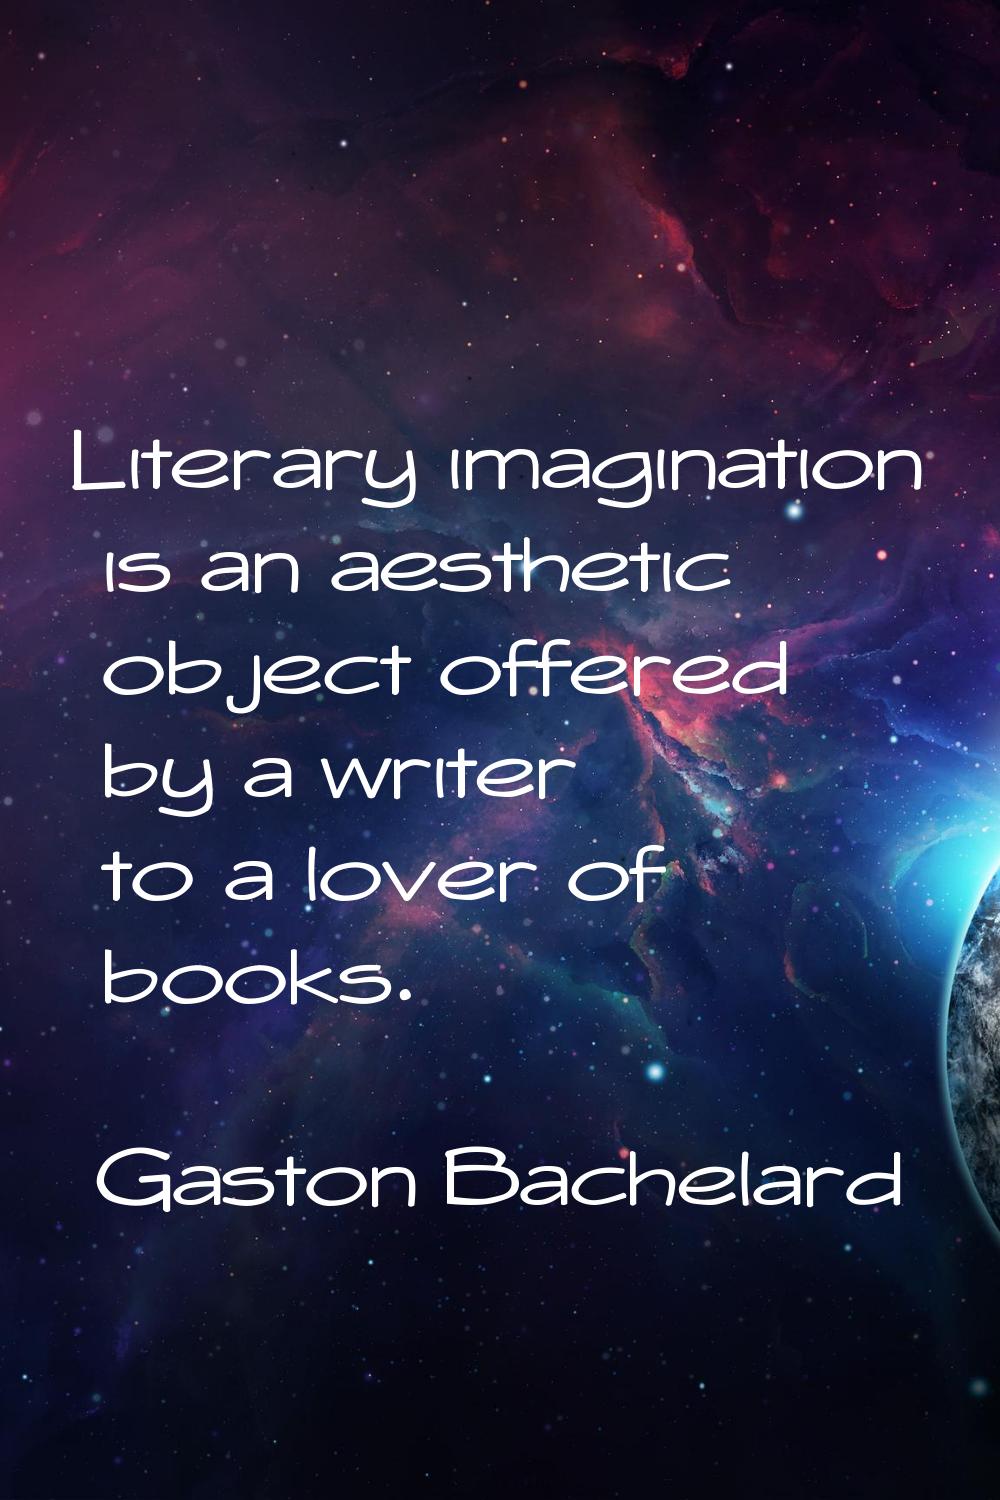 Literary imagination is an aesthetic object offered by a writer to a lover of books.